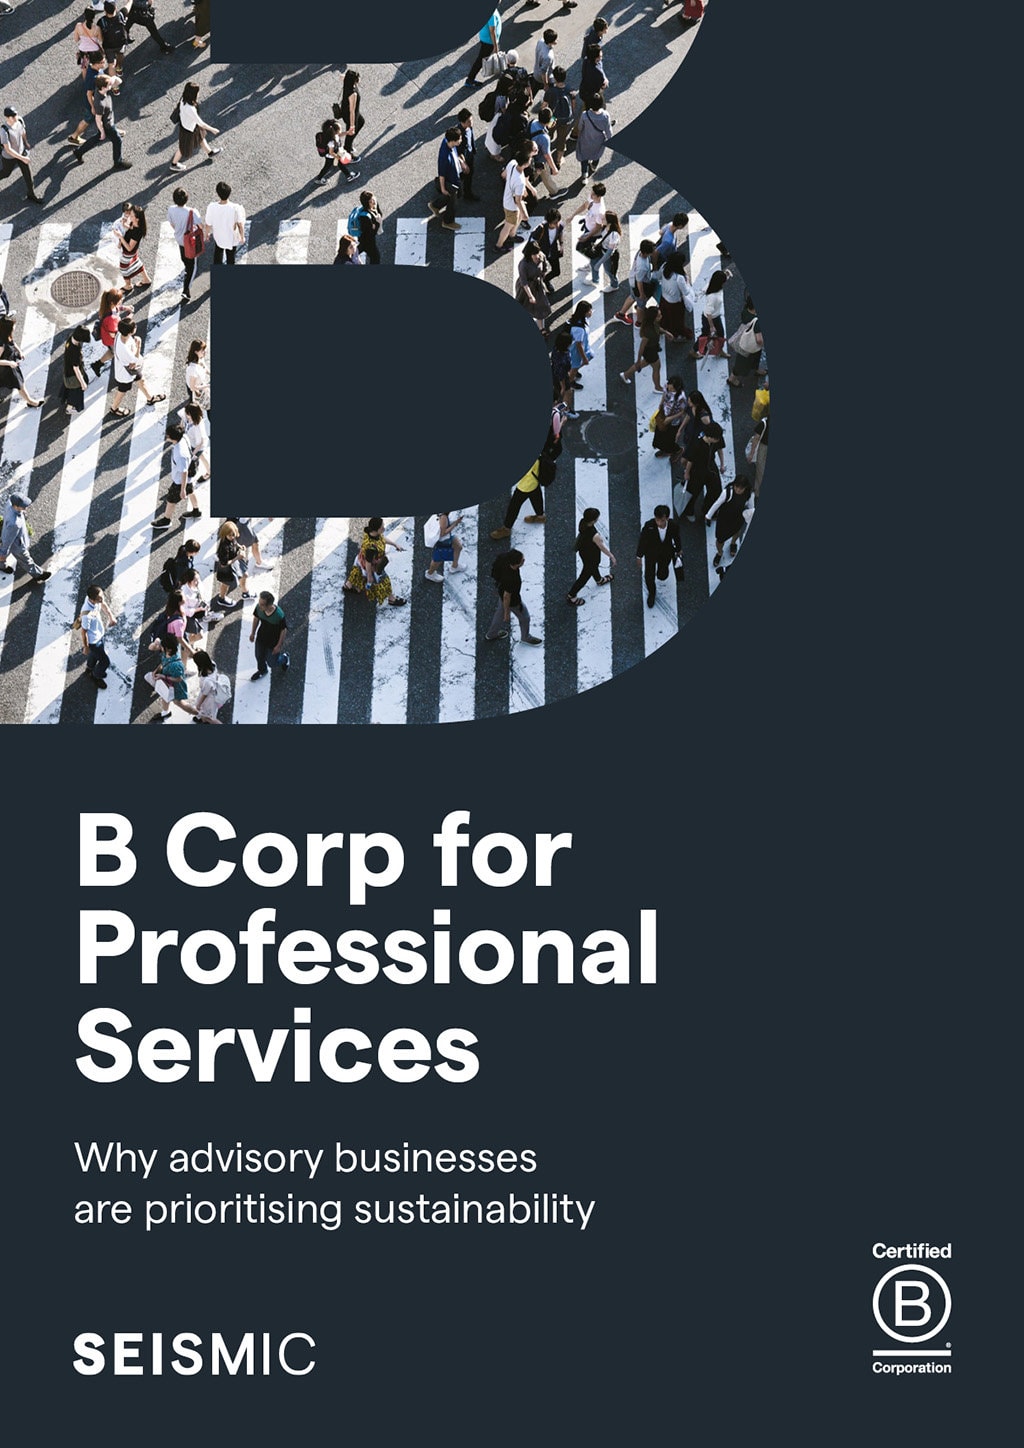 B Corp for Professional Services - Why advisory businesses are prioritising sustainability